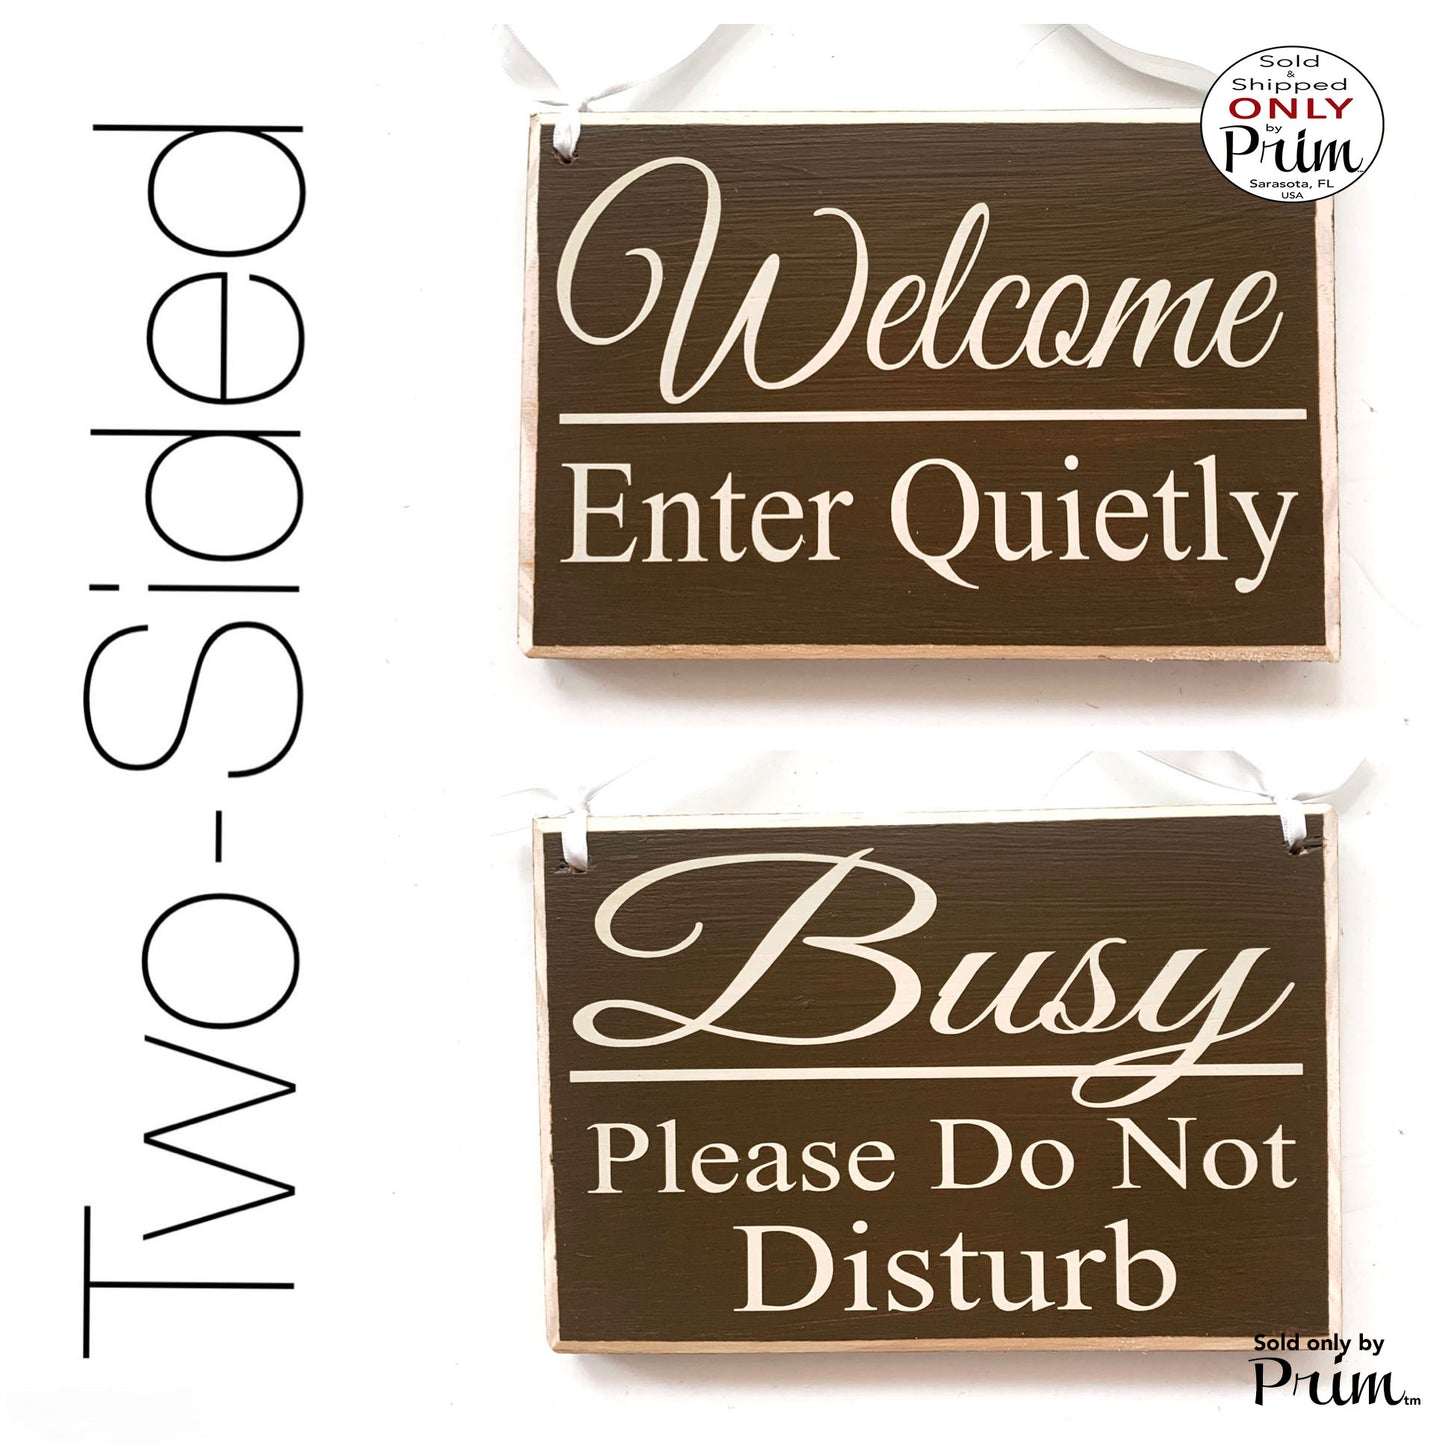 Two Sided 8x6 Welcome Enter Quietly Busy Please Do Not Disturb Custom Wood Sign Please Knock Busy Open Closed Spa Salon Office Door Hanger Designs by Prim